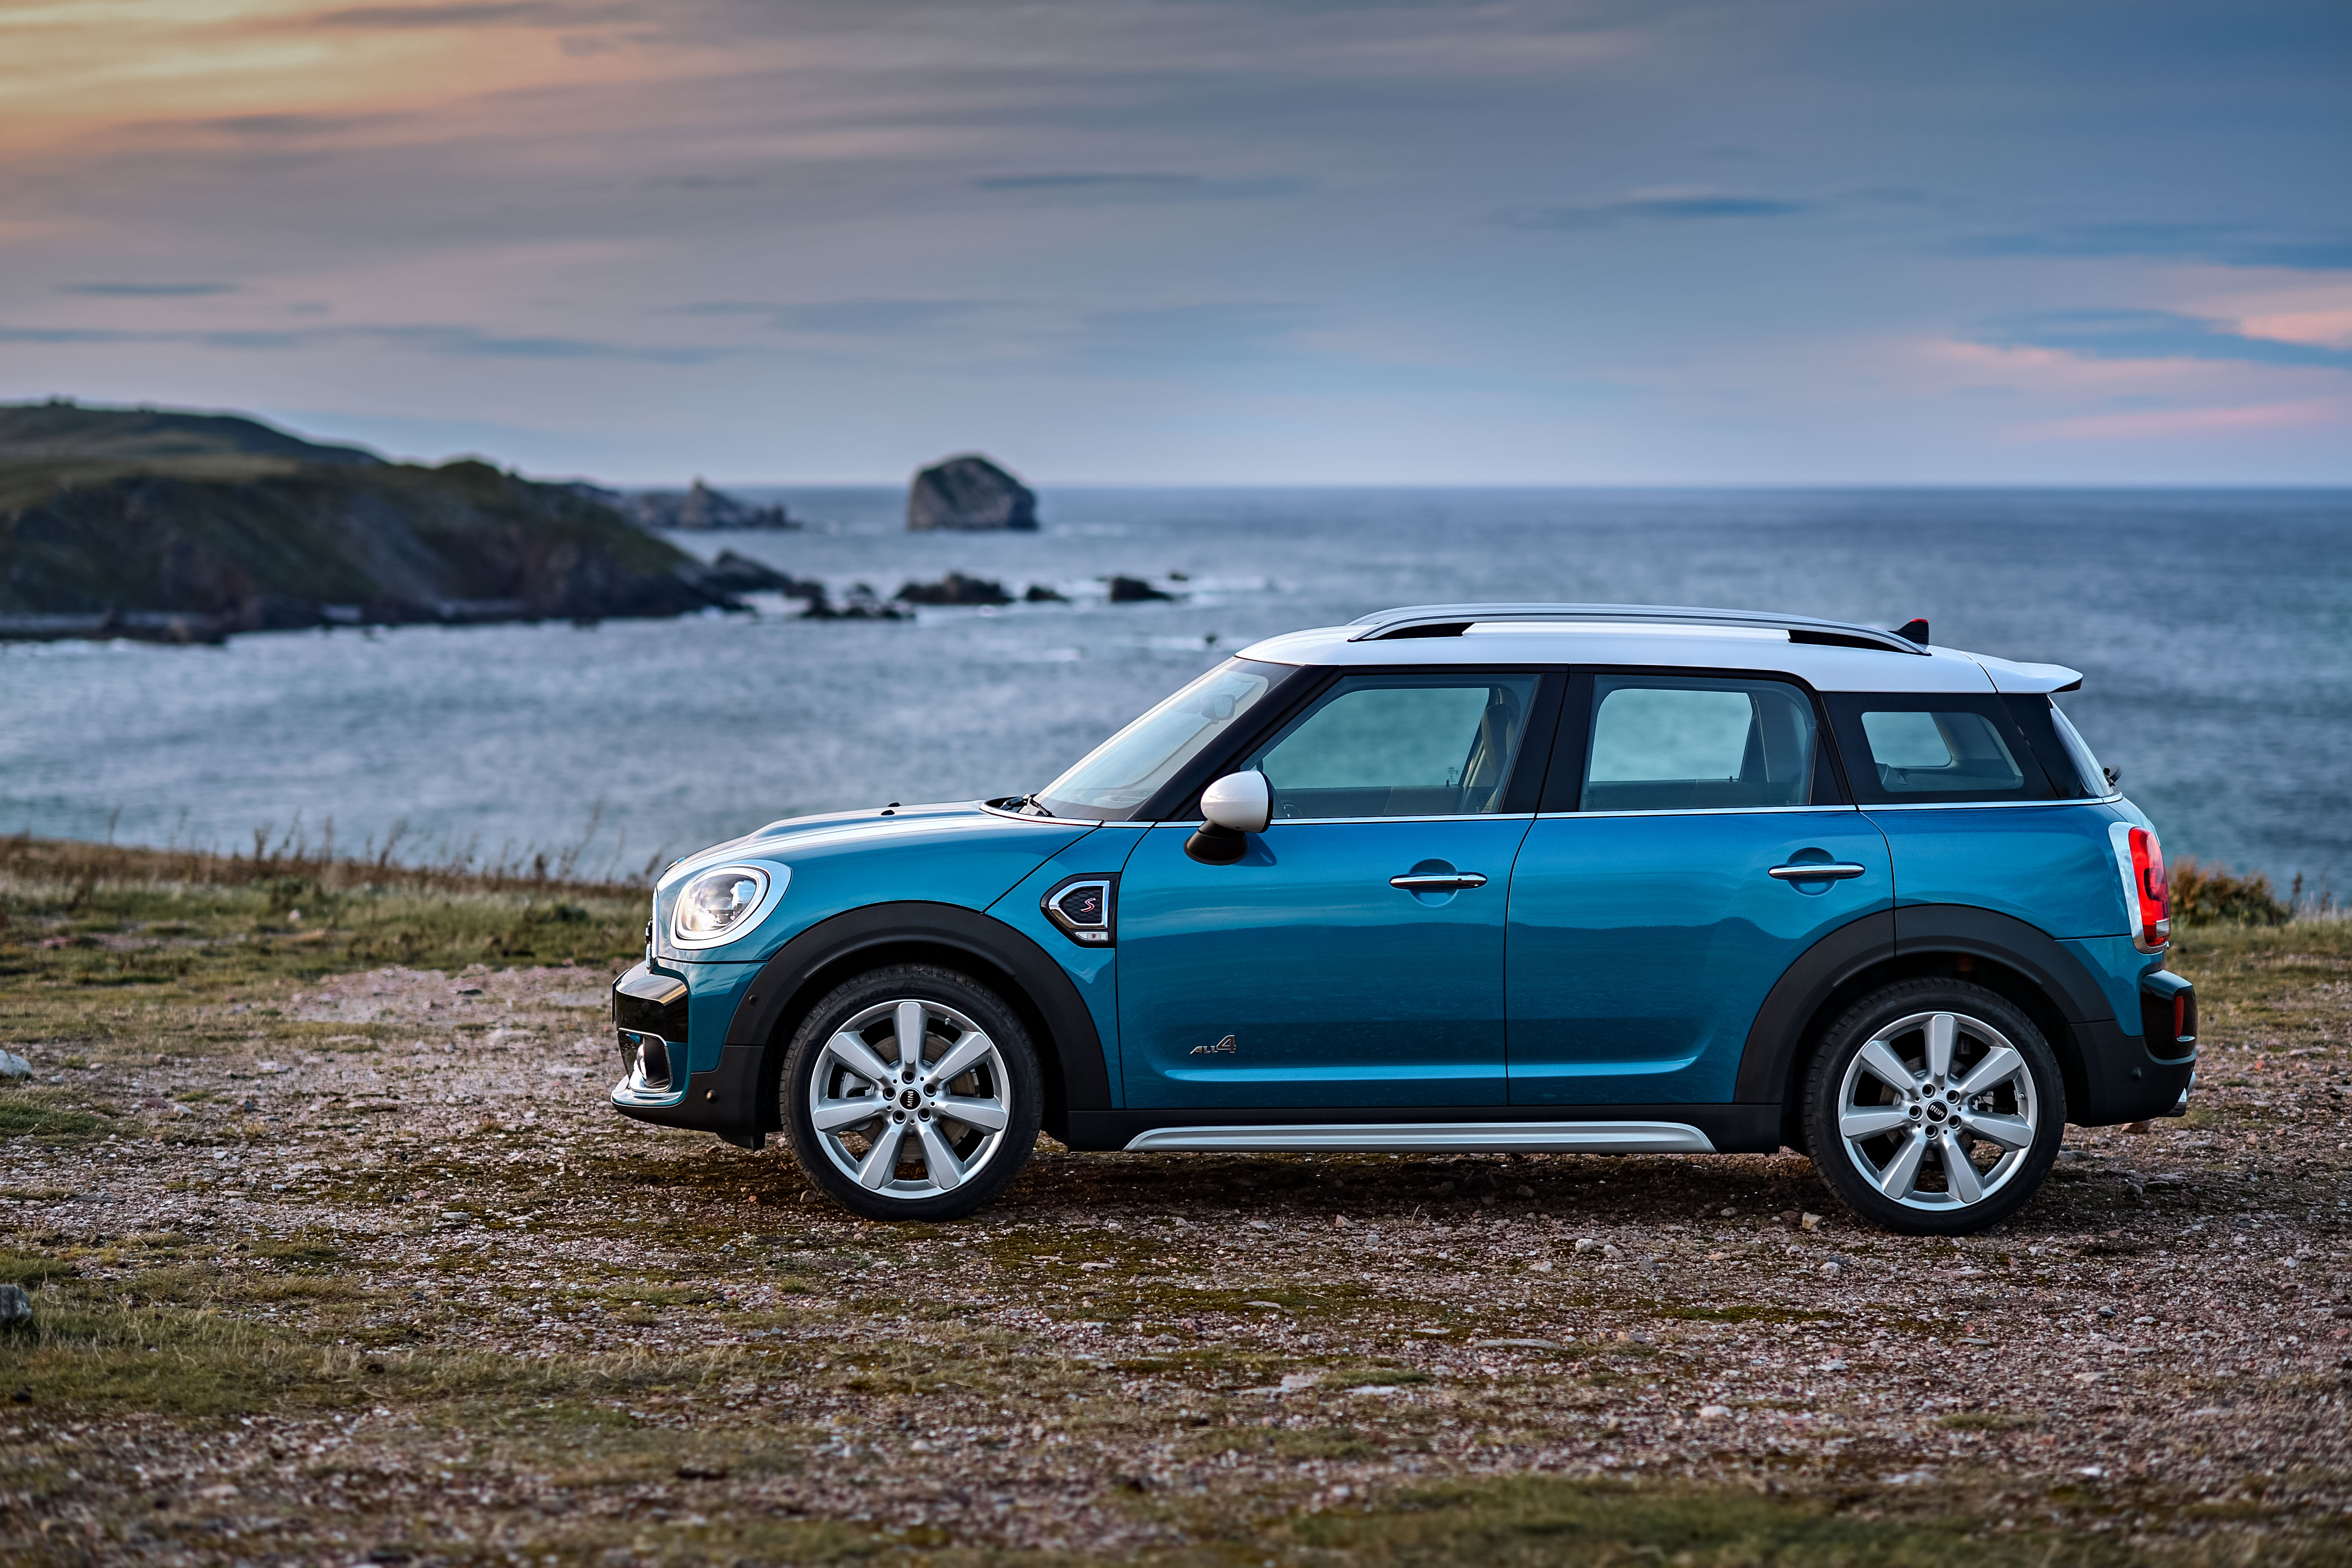 F60 MINI Countryman revealed – larger, with more tech 